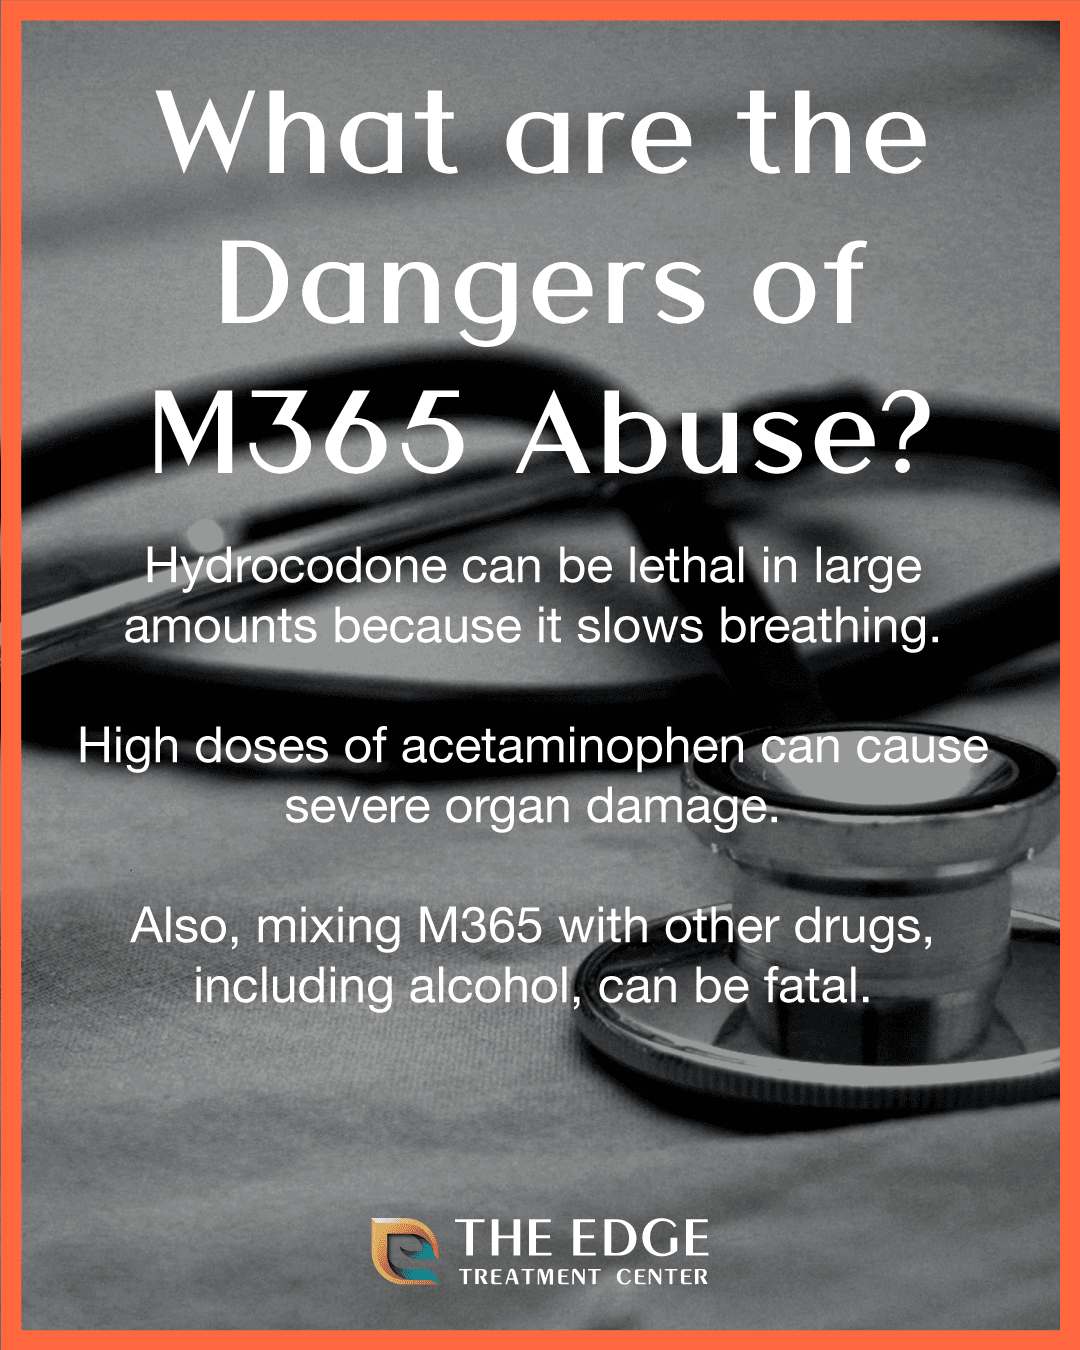 M365 Pill: The Dangers of M365 Abuse